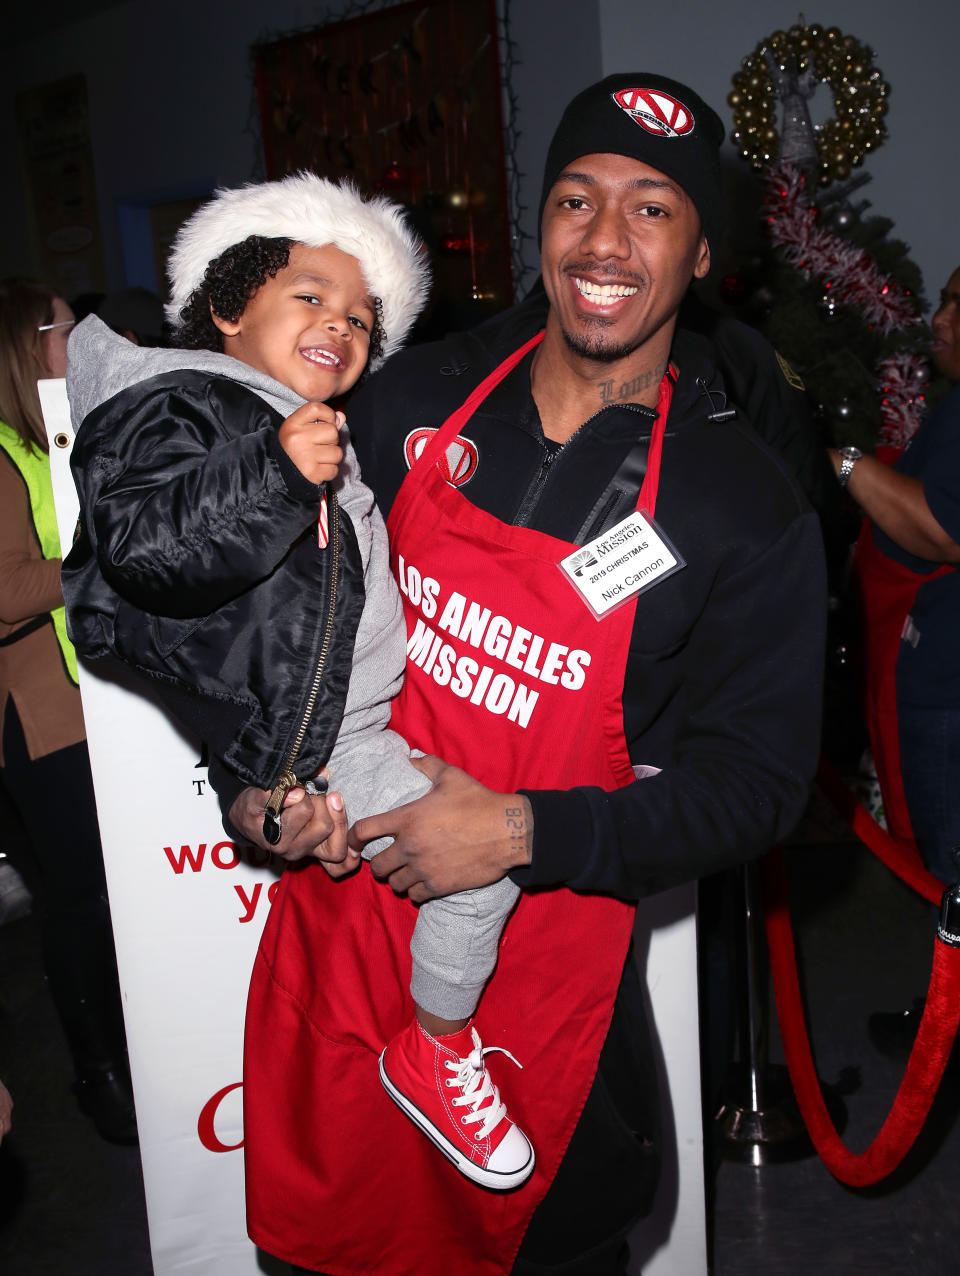 Nick Cannon holds a smiling child while wearing a red "Los Angeles Mission" apron at a charity event